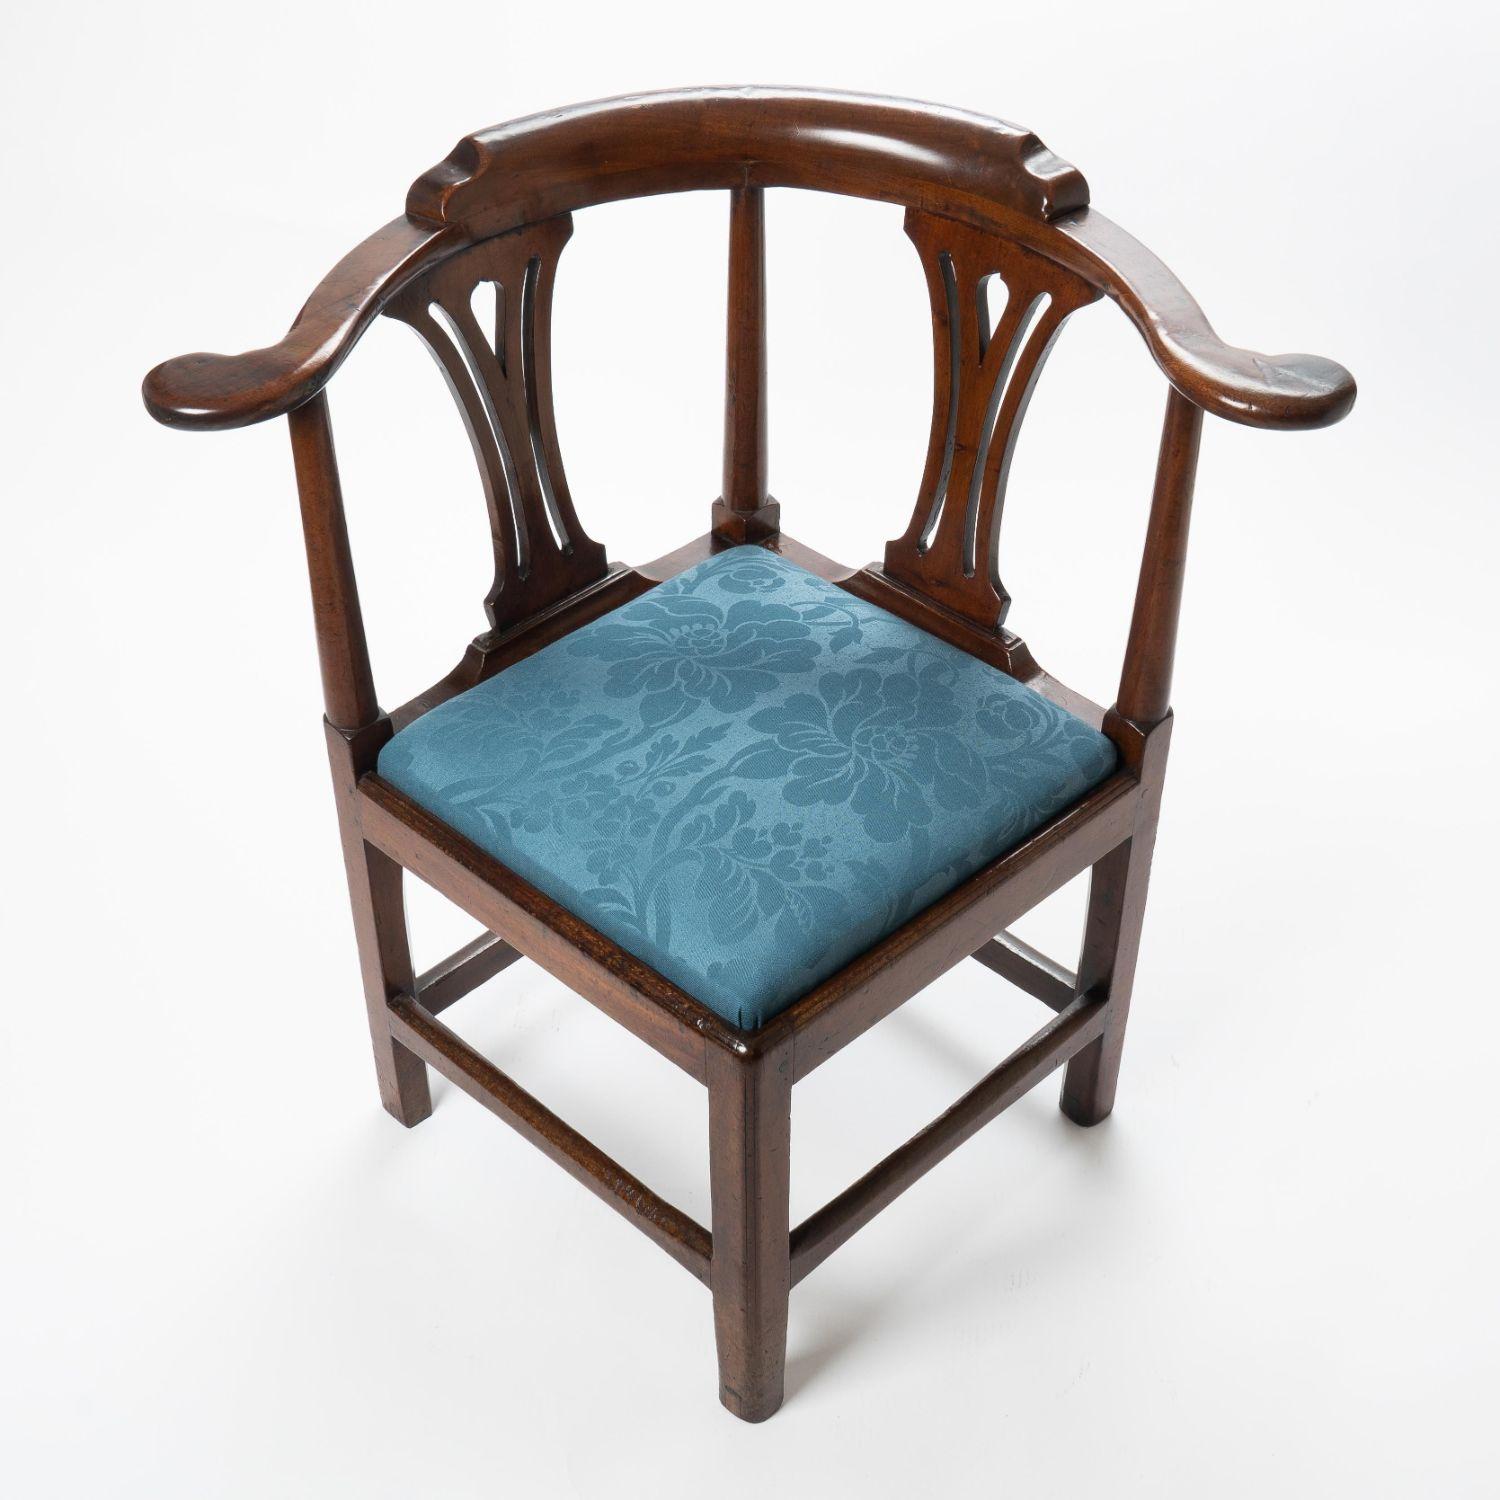 George III mahogany corner chair upholstered with a slip seat in blue marine wool. The legs are square with beaded corners, and the crescent shaped crest rail is supported by pierced back splats and turned posts at the scroll arm